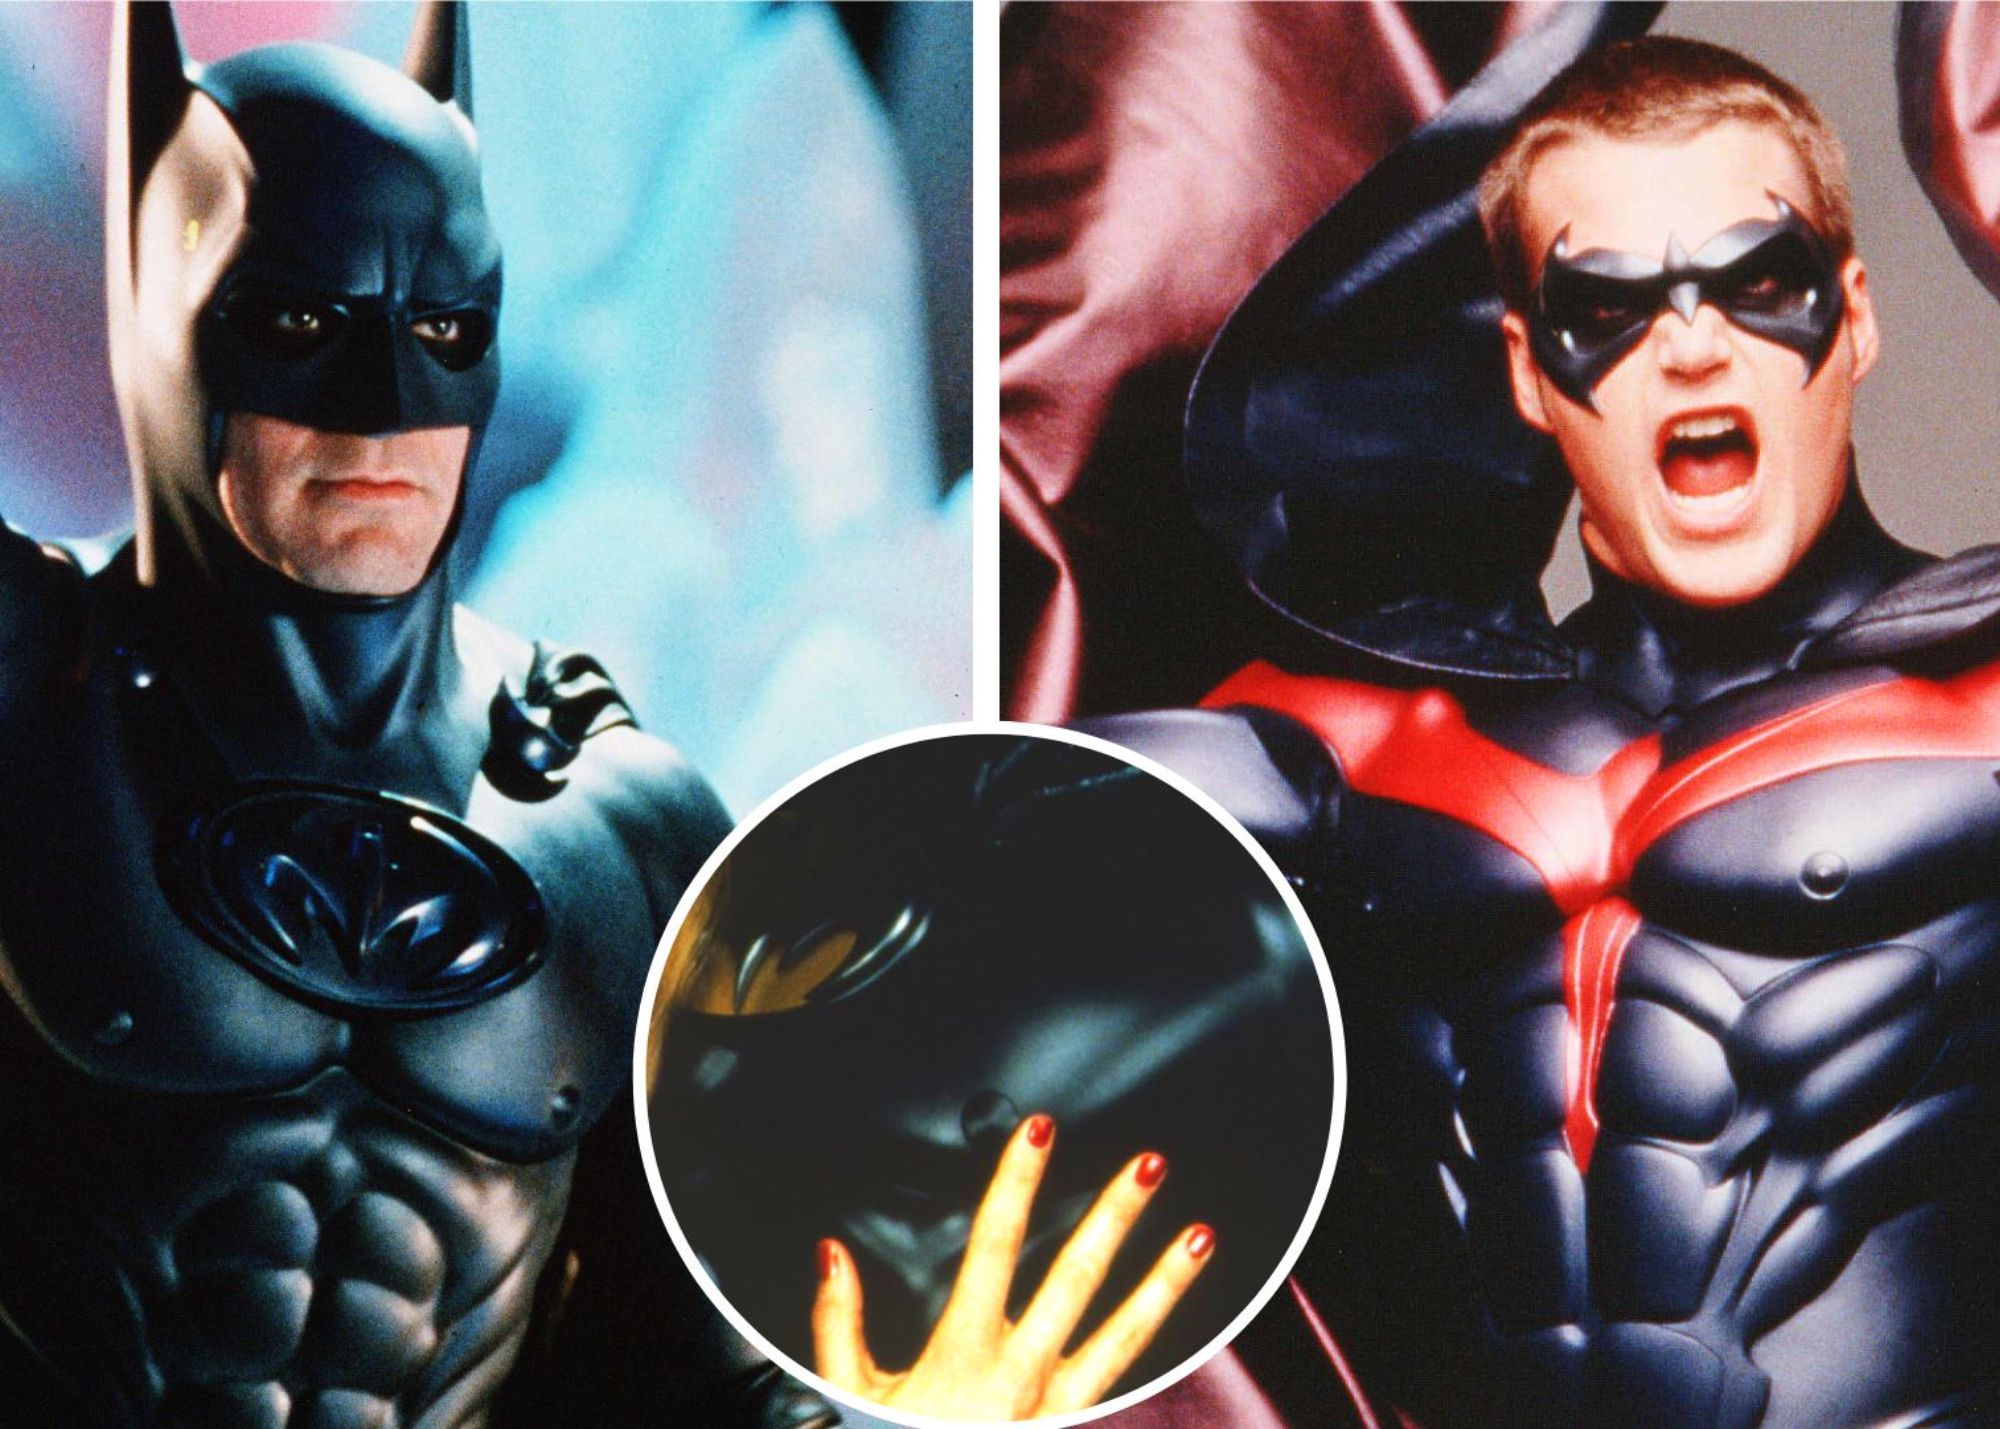 Batman and Robin characters suit with noticeable nipples and on the middle is a woman's hand touching the costume's nipples